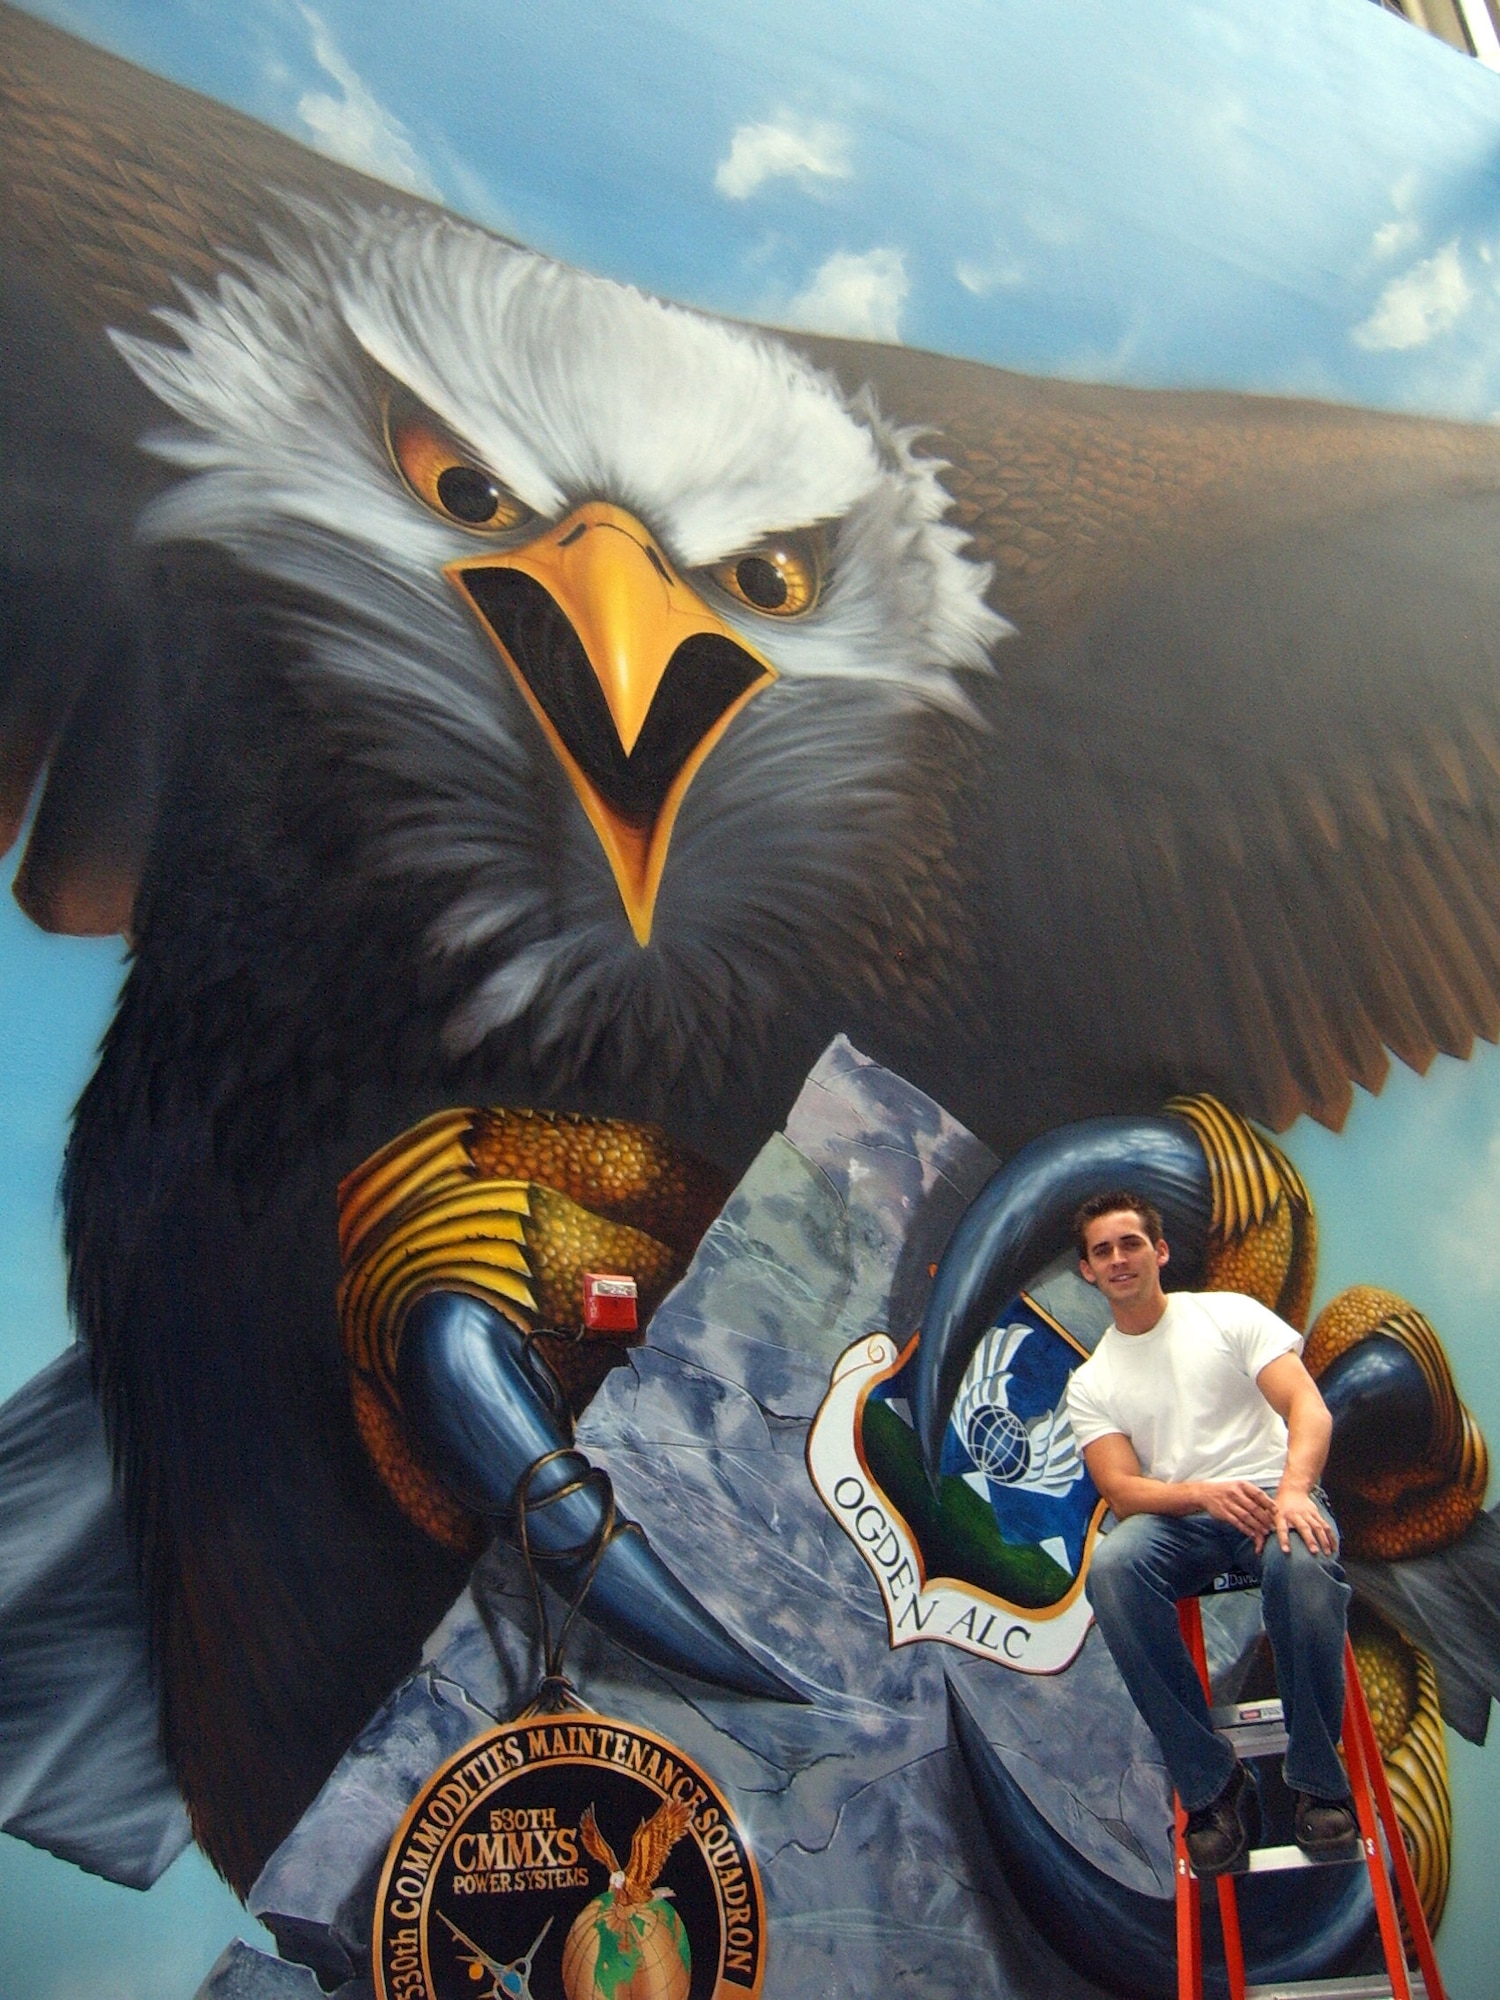 Jasey Colunga, machinist with the 530th Commodities Maintenance Squadron, leans on his most recently completed artwork at Hill Air Force Base. This is the single largest work of art Mr. Colunga has completed. The entire mural spans 170 feet by 35 feet, and is too wide to capture in a single photo. Drafts for the mural began with roadmaps from Texas to Utah representing the connection the unit has had with Texas in the past. Those drafts were tossed aside, however, and replaced with an all encompassing picture of Utah. The mural depicts southern Utah on the left and northern Utah on the right side. “The mural is really just to boost morale in our building,” said Mr. Colunga. “It turns our industrial workplace into an interesting shop that people remember.” Courtesy Photo